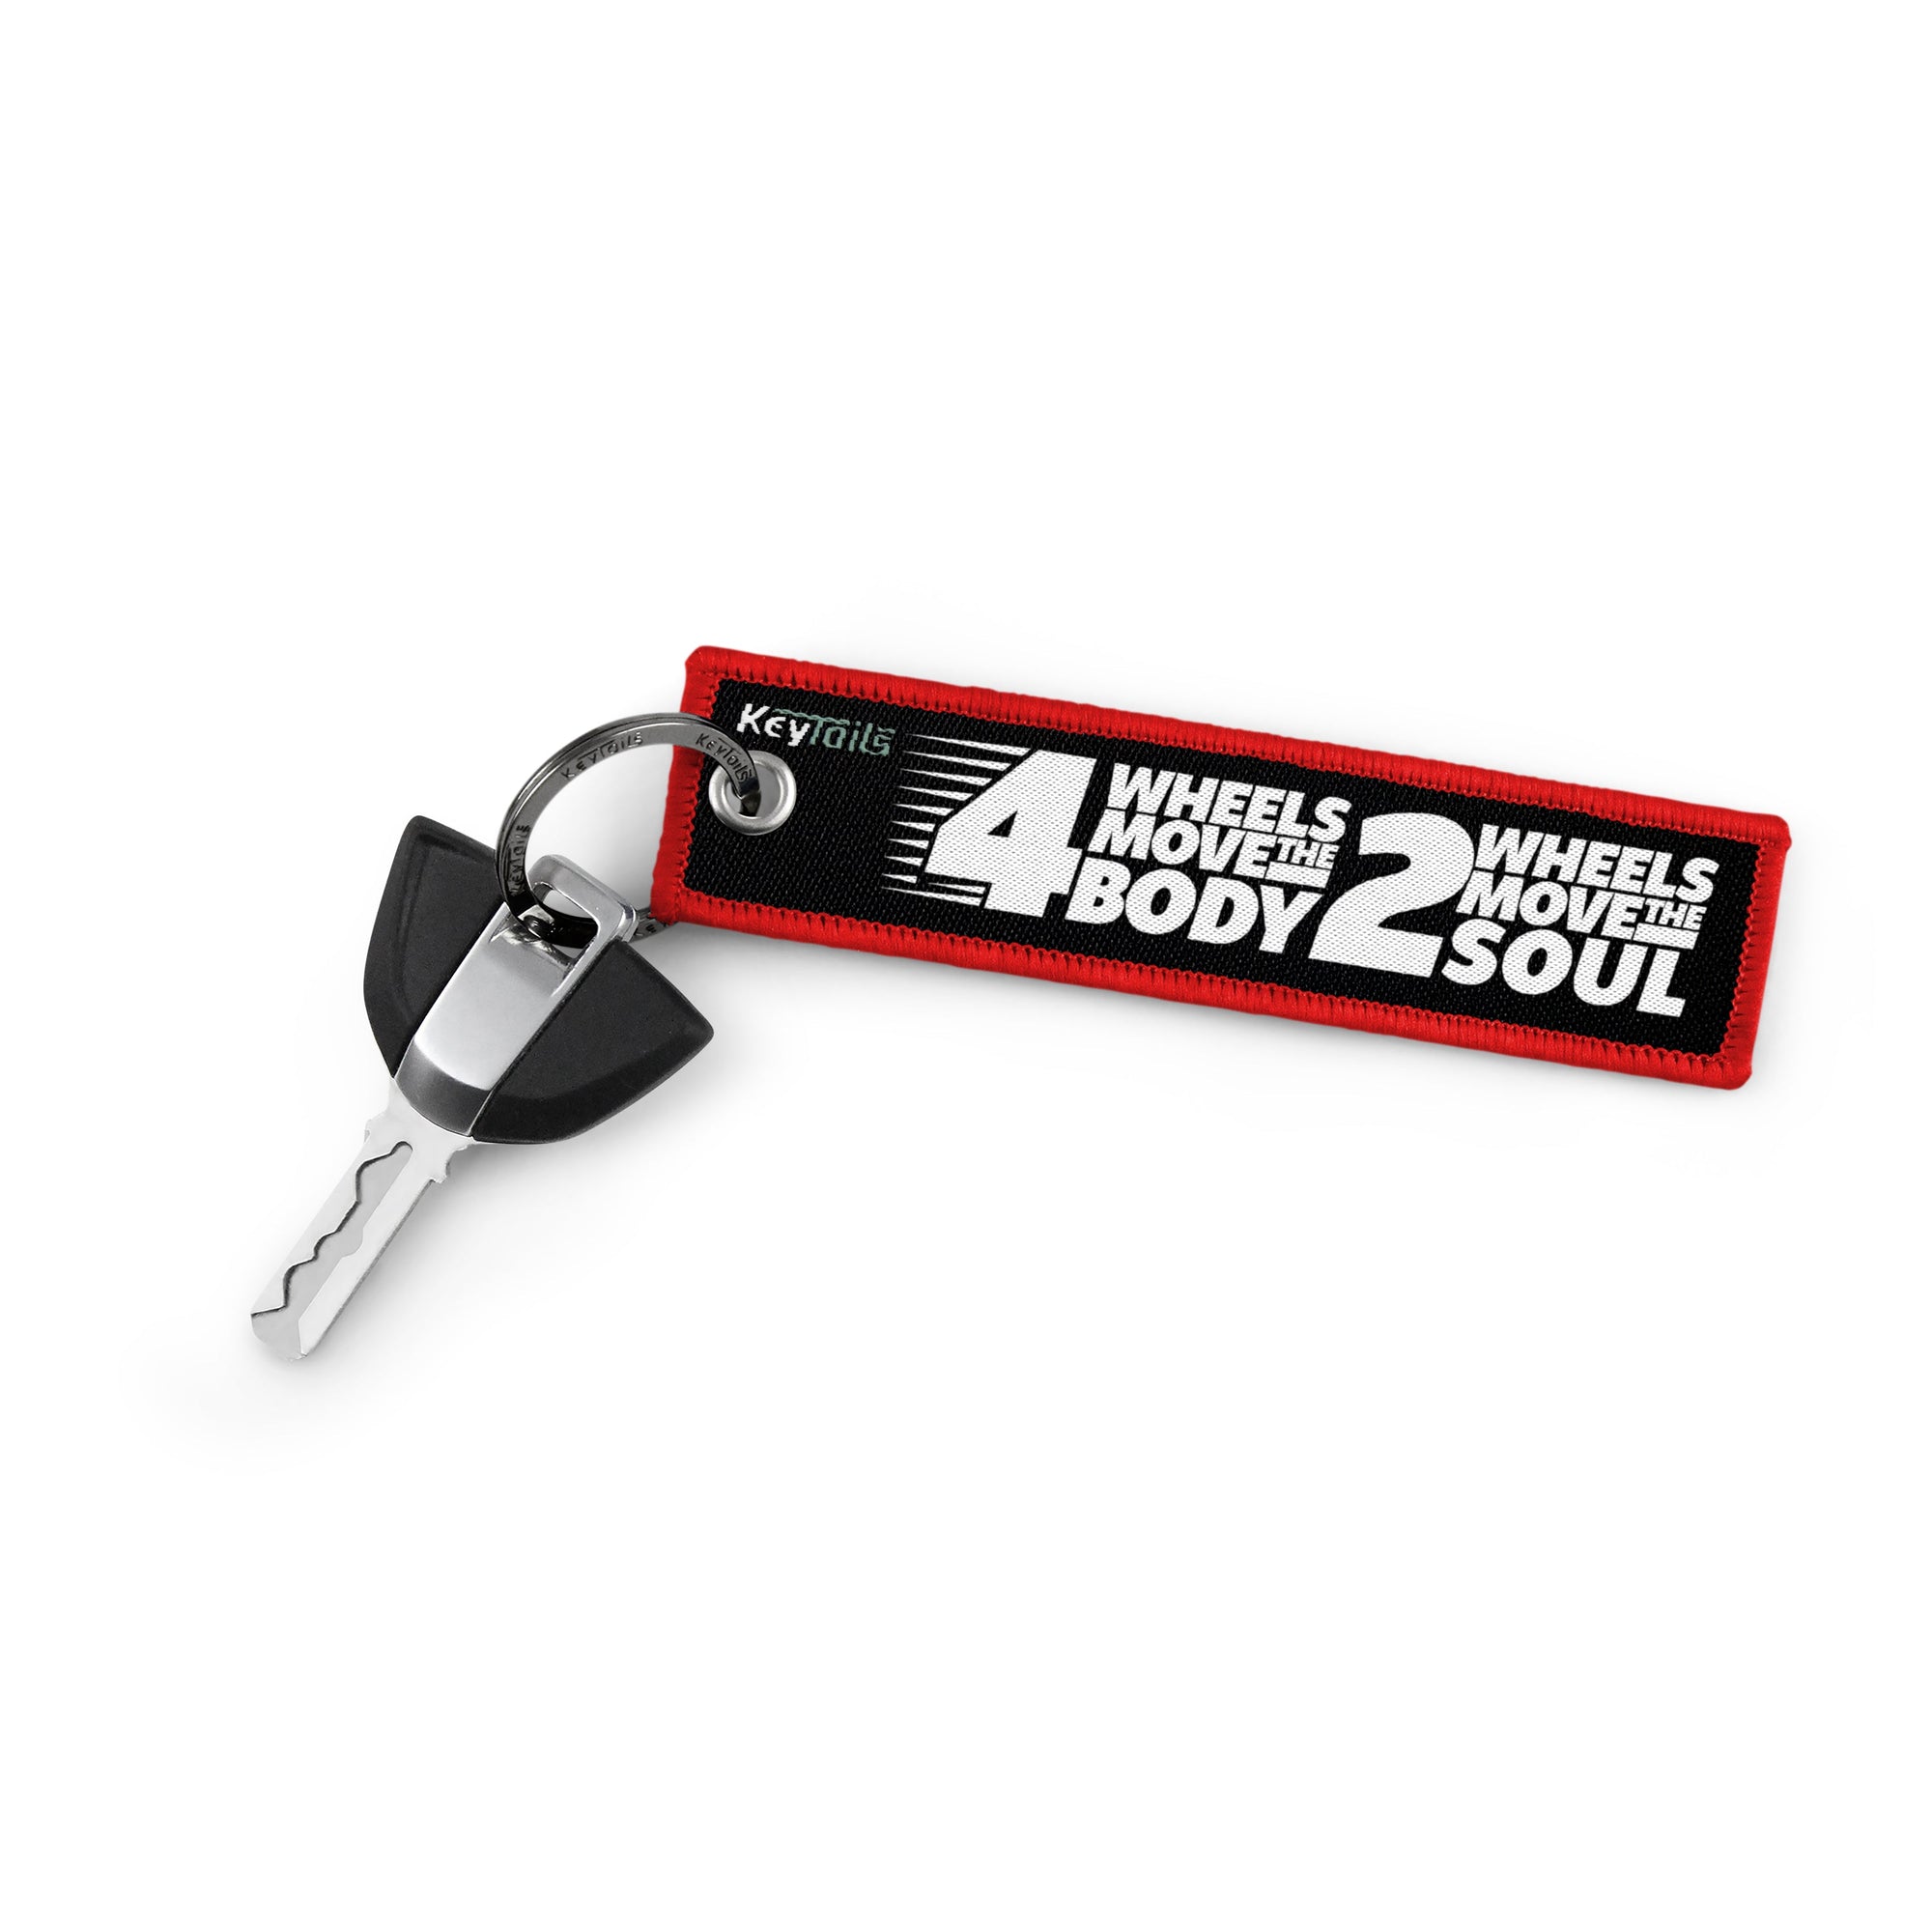 4 Wheels Move the Body 2 Wheels Move the Soul Keychain, Key Tag - Red